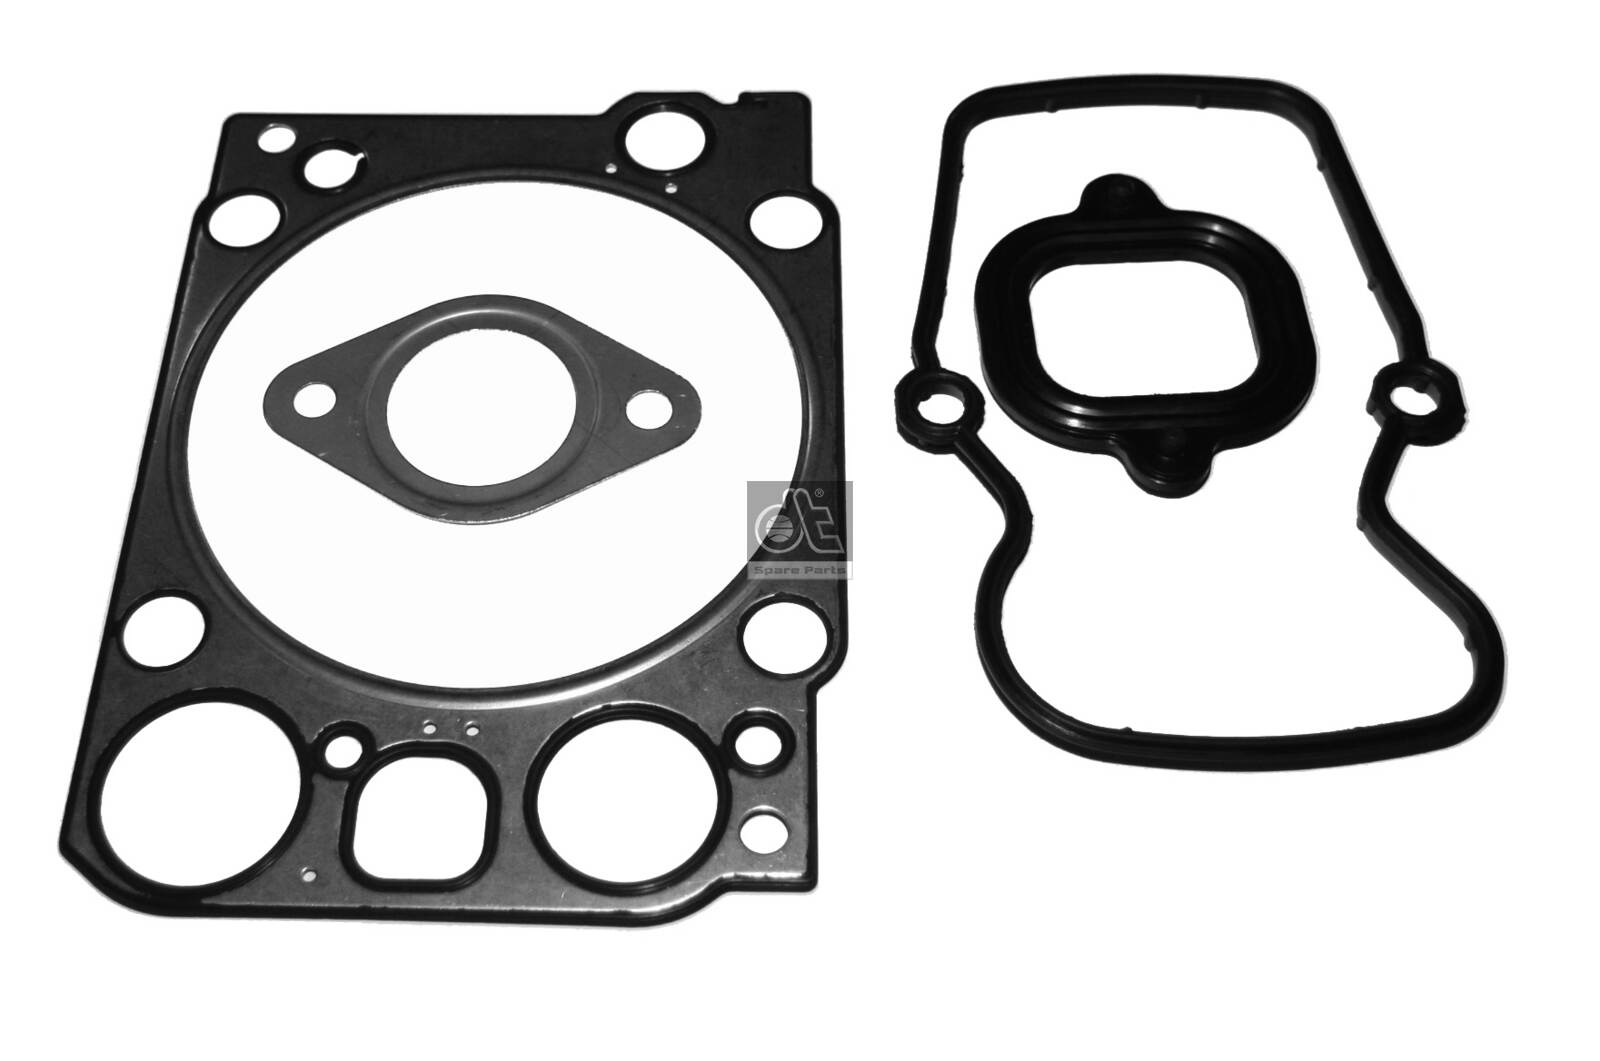 4.90853, Gasket Kit, cylinder head, DT Spare Parts, 4570104220, 4570106220, A4570104220, A4570106220, 0001832, 011.504, 01.43.545, 03-34190-03, 0340010008, 1251407, 86065, 91261, T8000591, 001.830, 86065.06, 001.832, 86065.07, 122.800